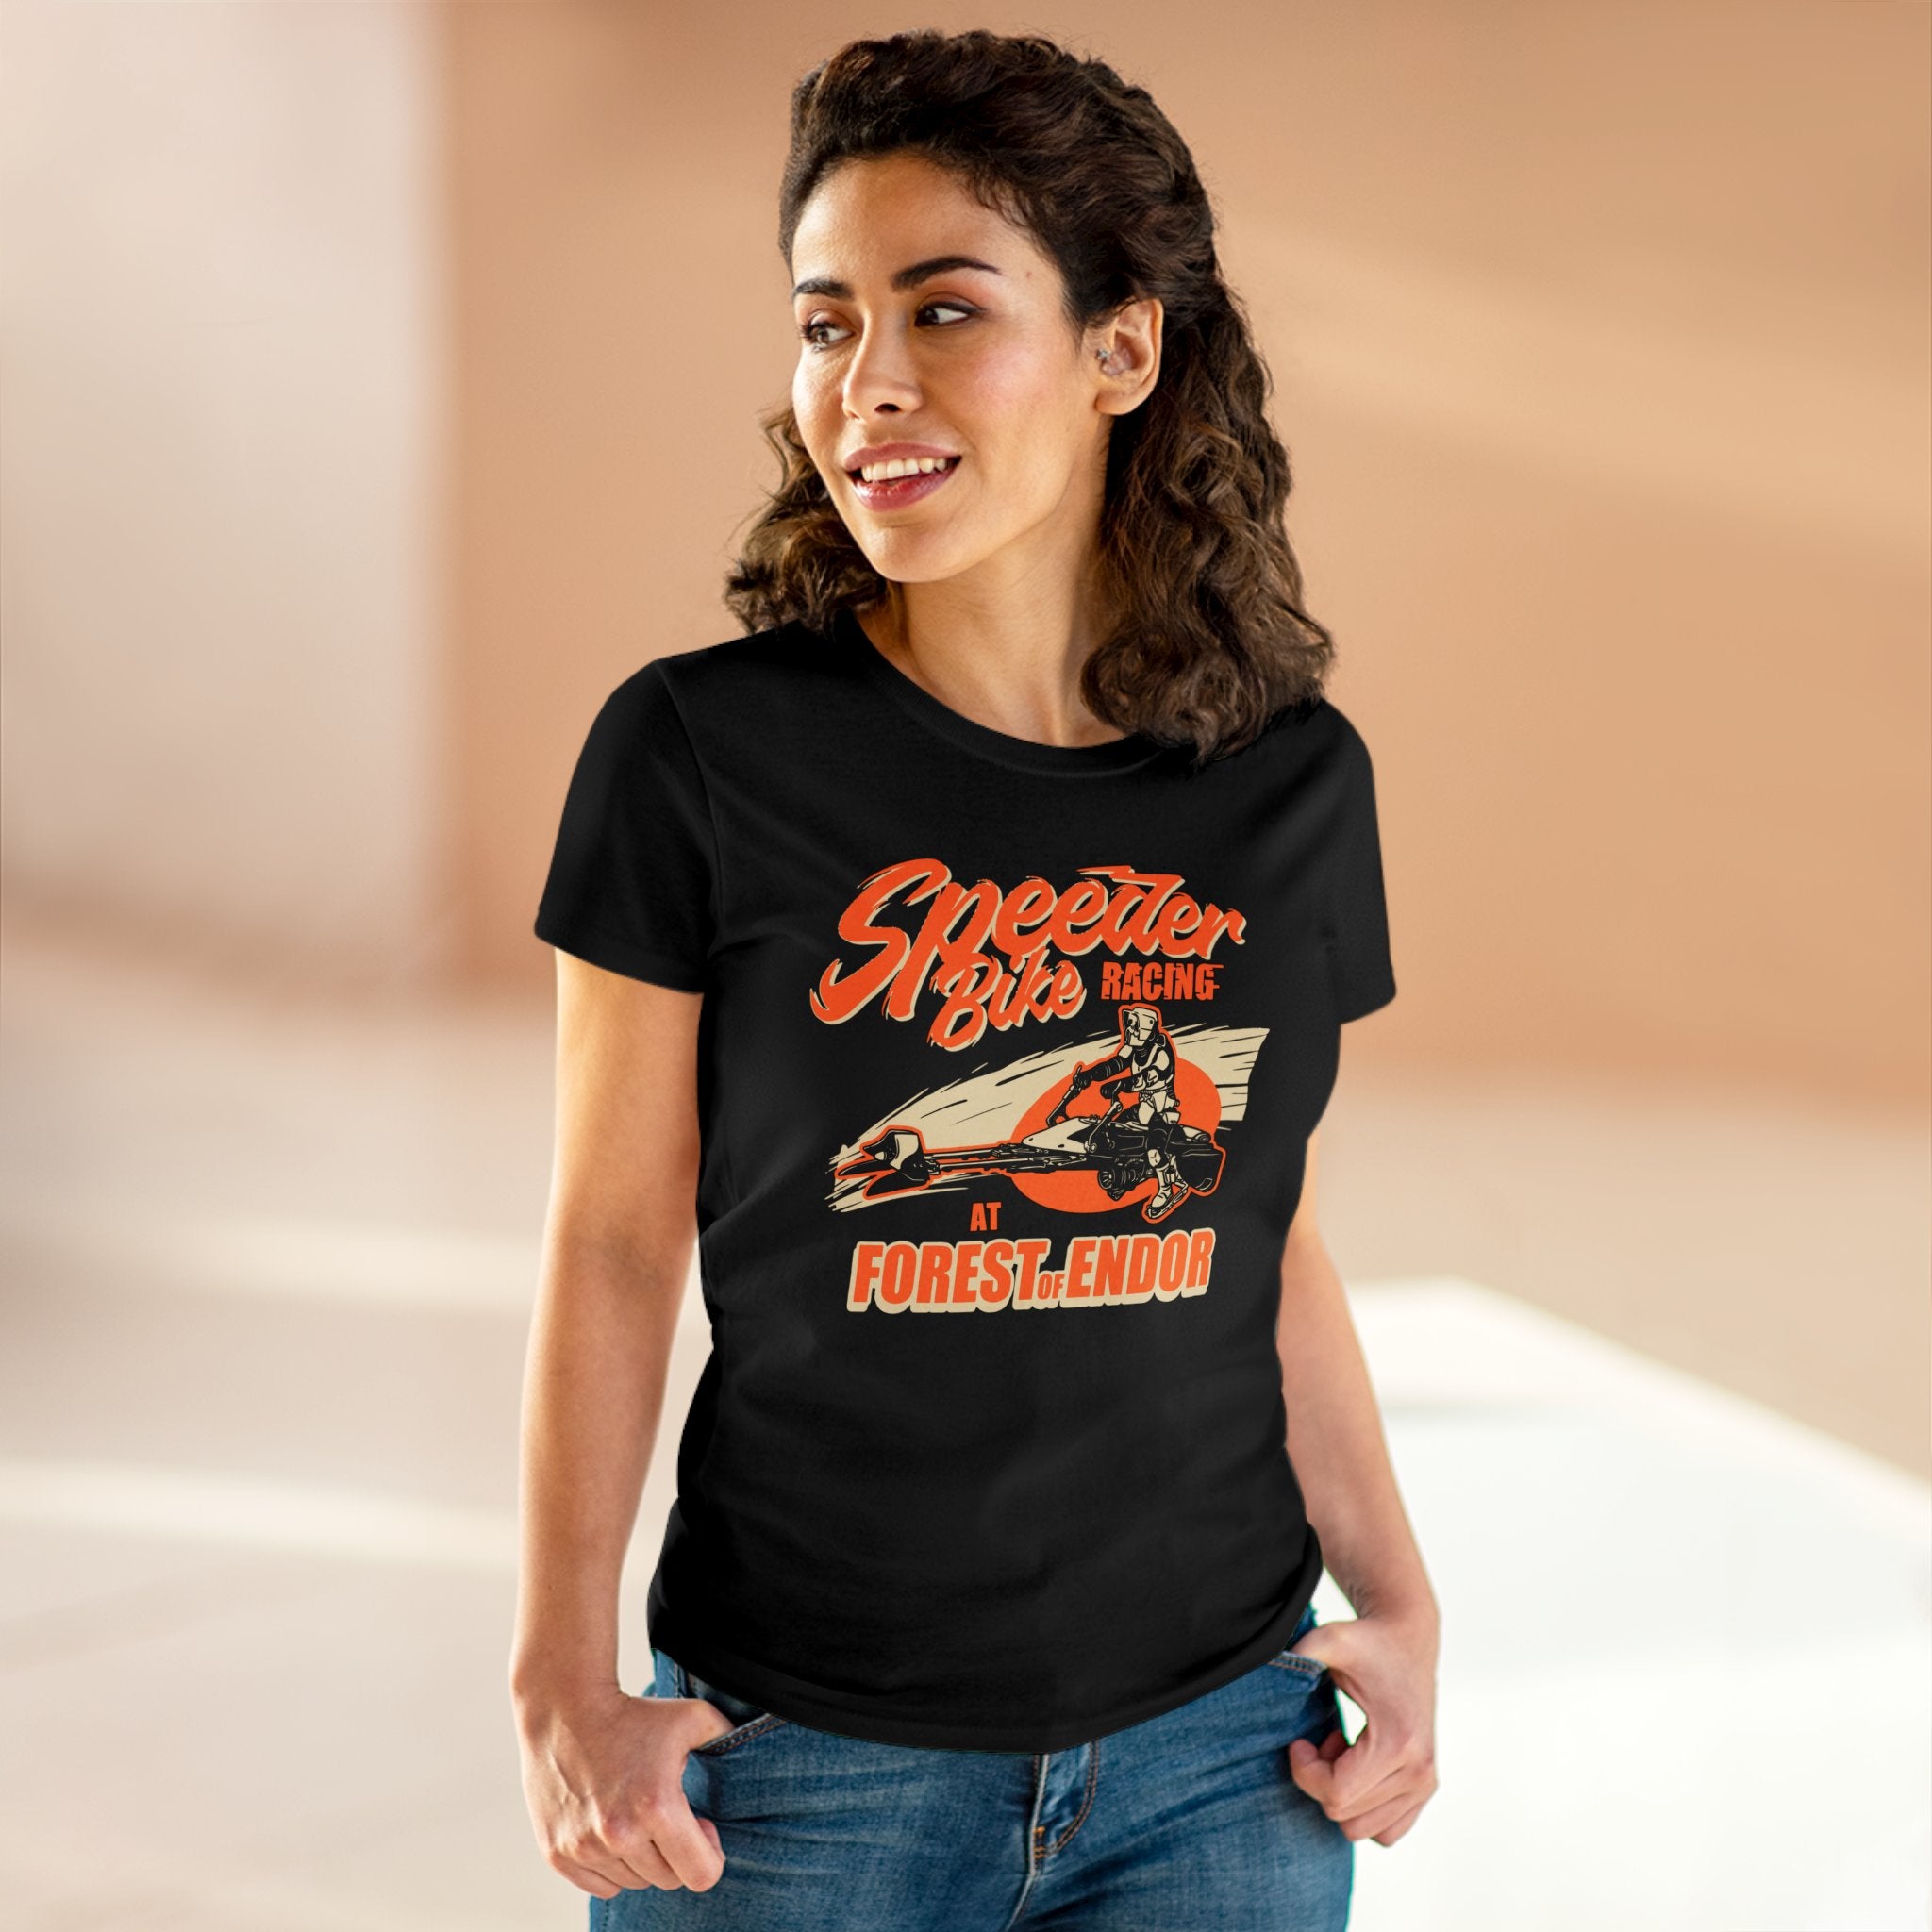 A person stands indoors, smiling and wearing a pre-shrunk cotton black t-shirt that reads "Speeder Bike Racing - Women's Tee" with an image of a person riding a speeder bike.